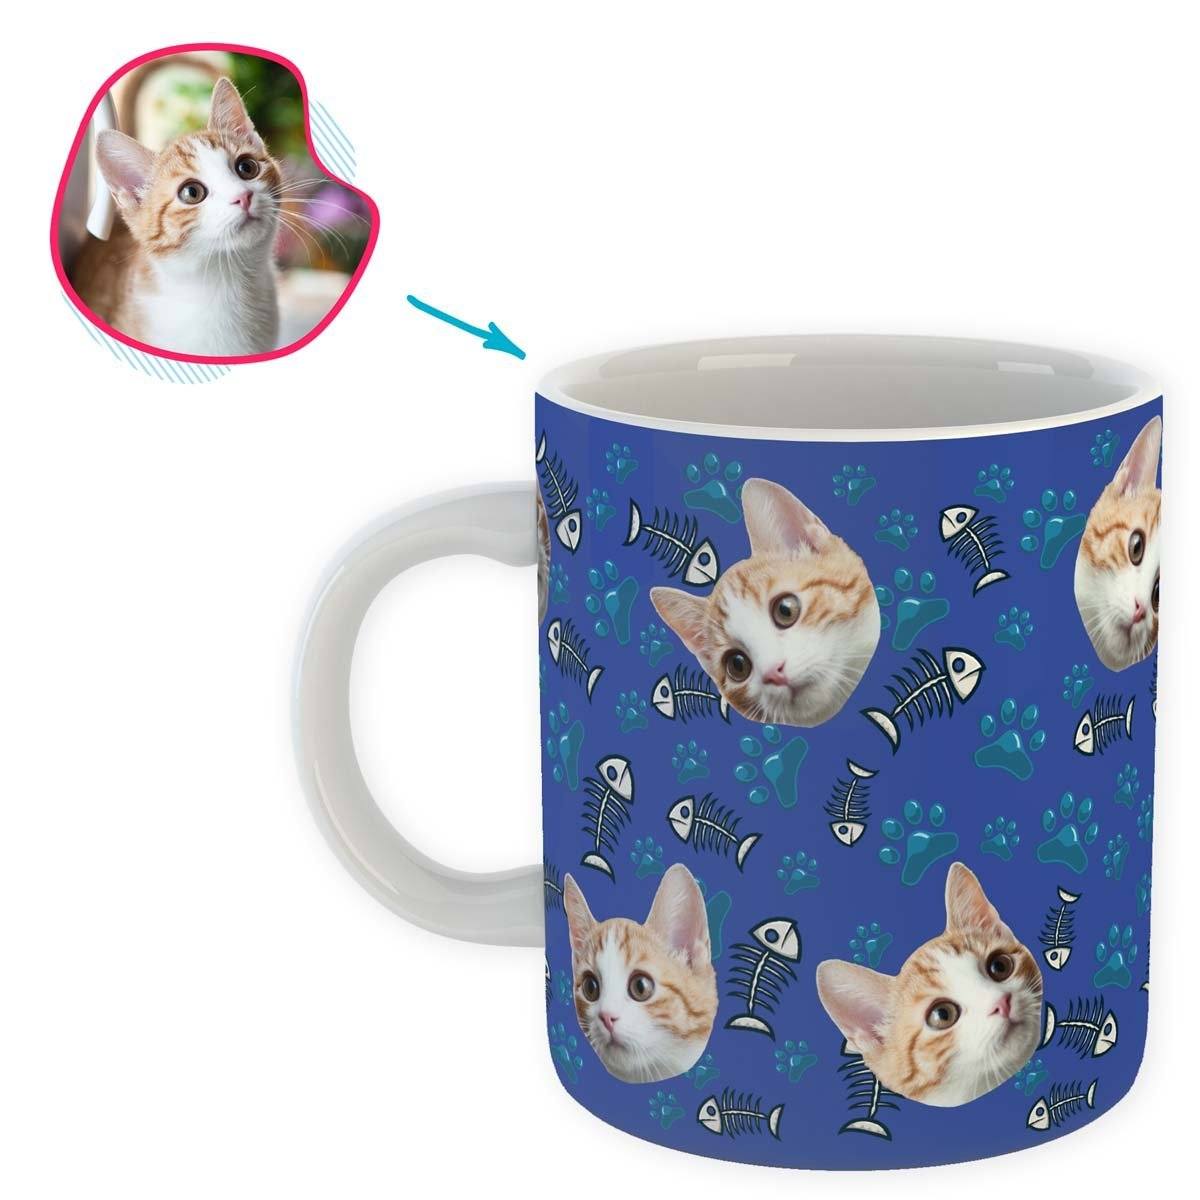 darkblue Cat mug personalized with photo of face printed on it